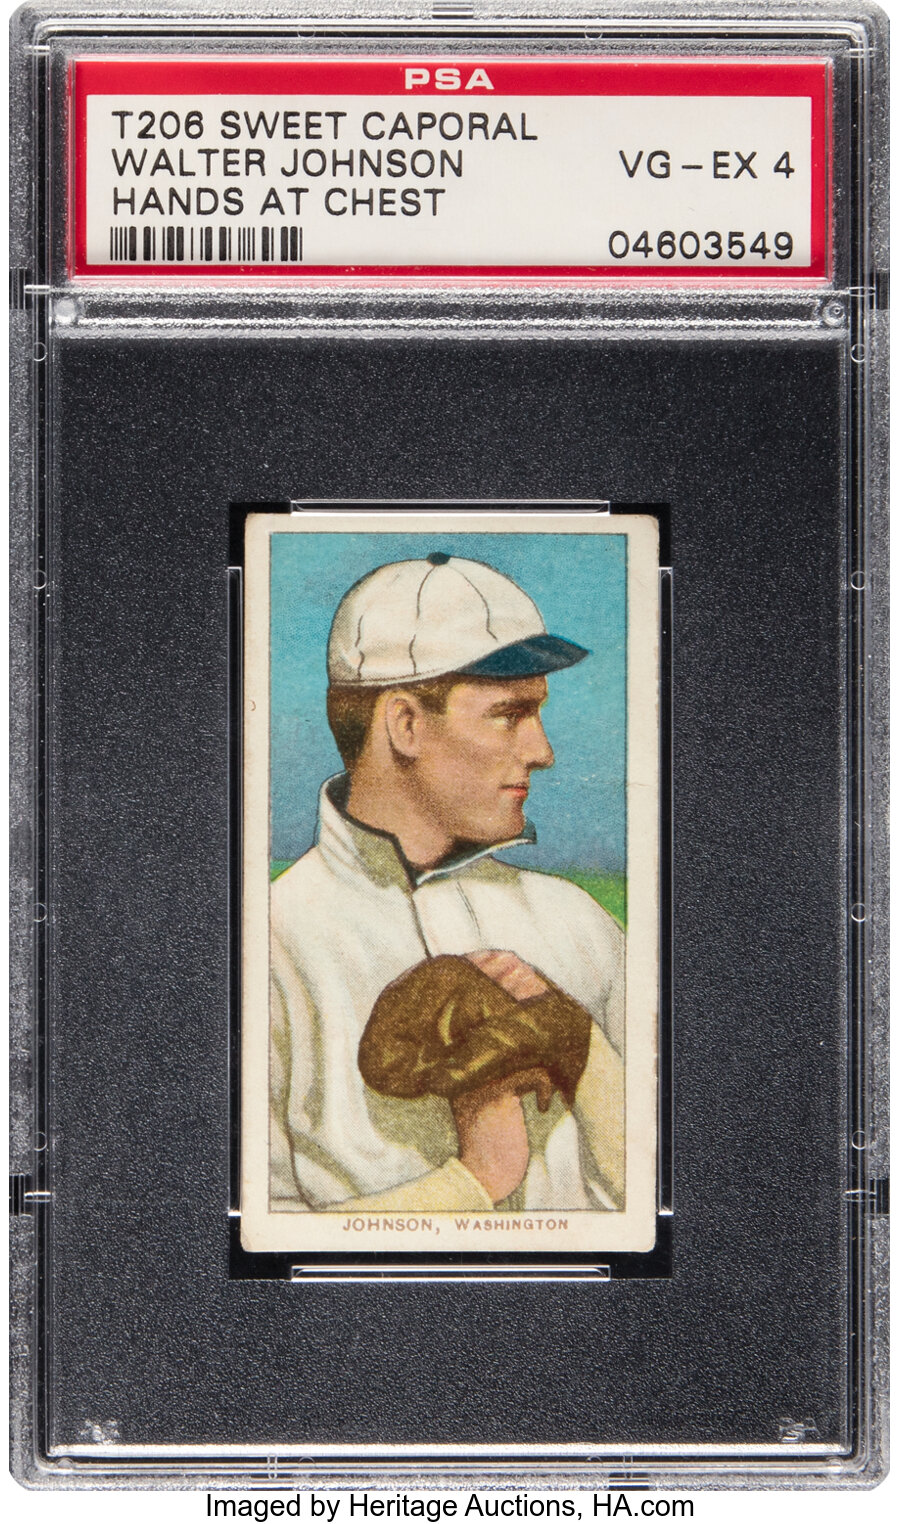 1909-11 T206 Sweet Caporal Walter Johnson (Hands at Chest) PSA VG-EX 4